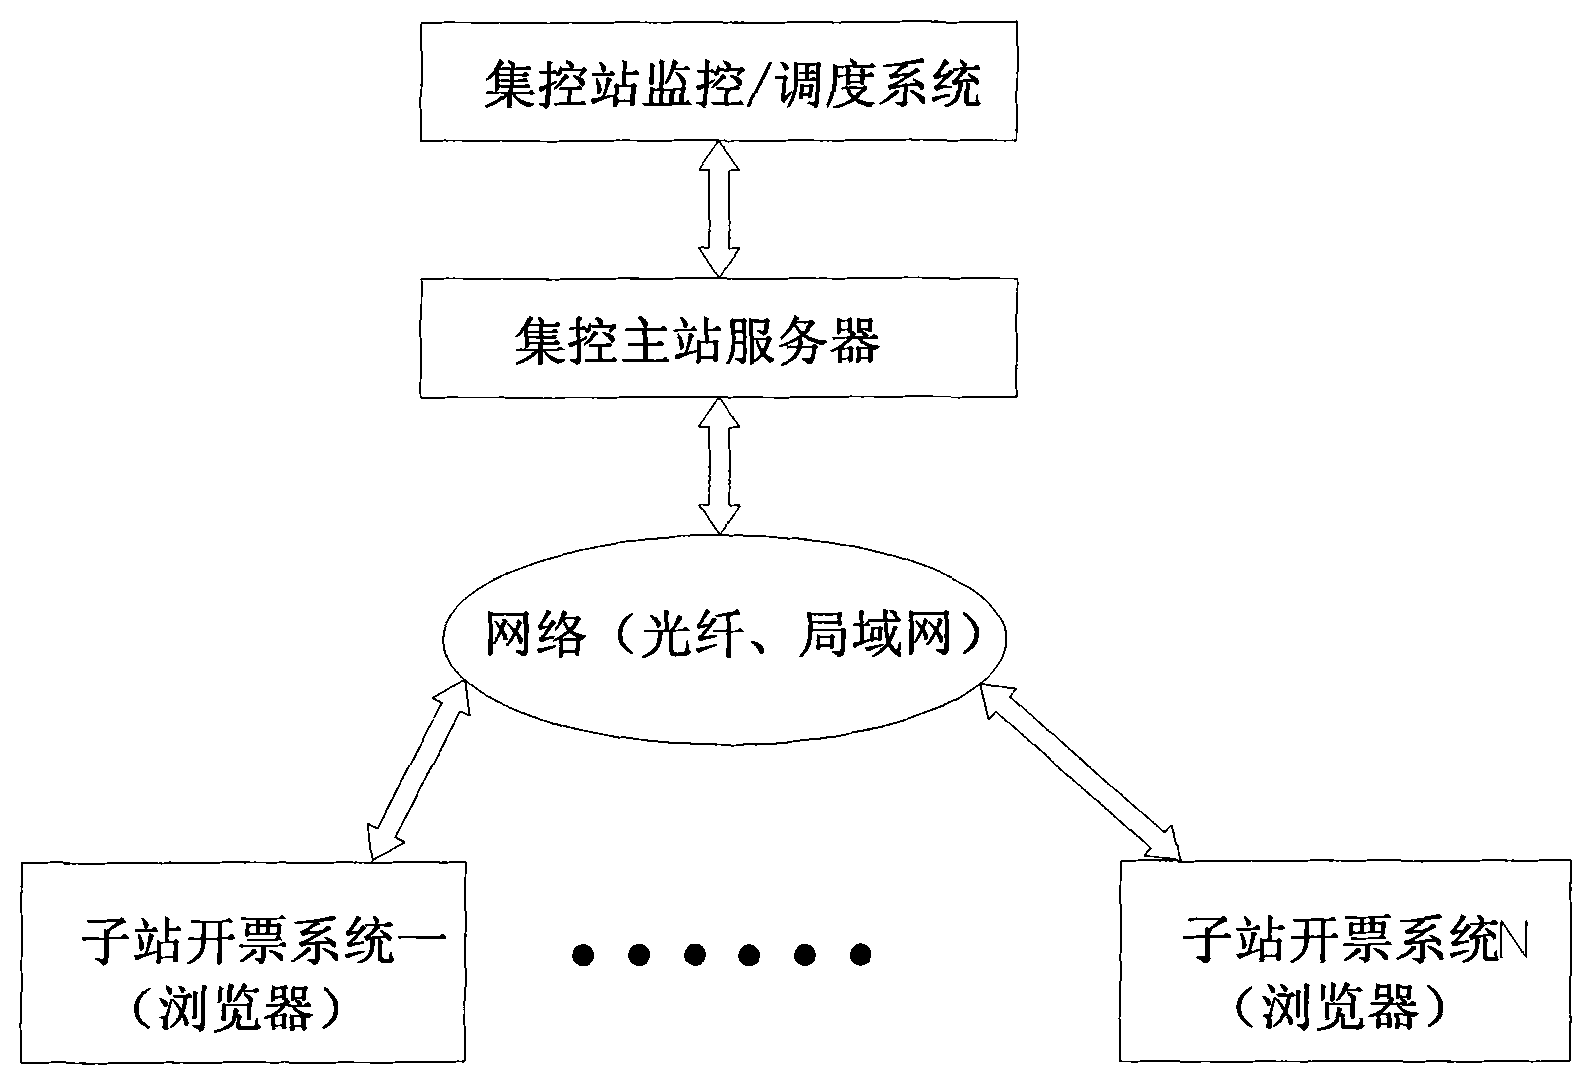 Operating method of B/S framework networked electronic simulation drawing board system